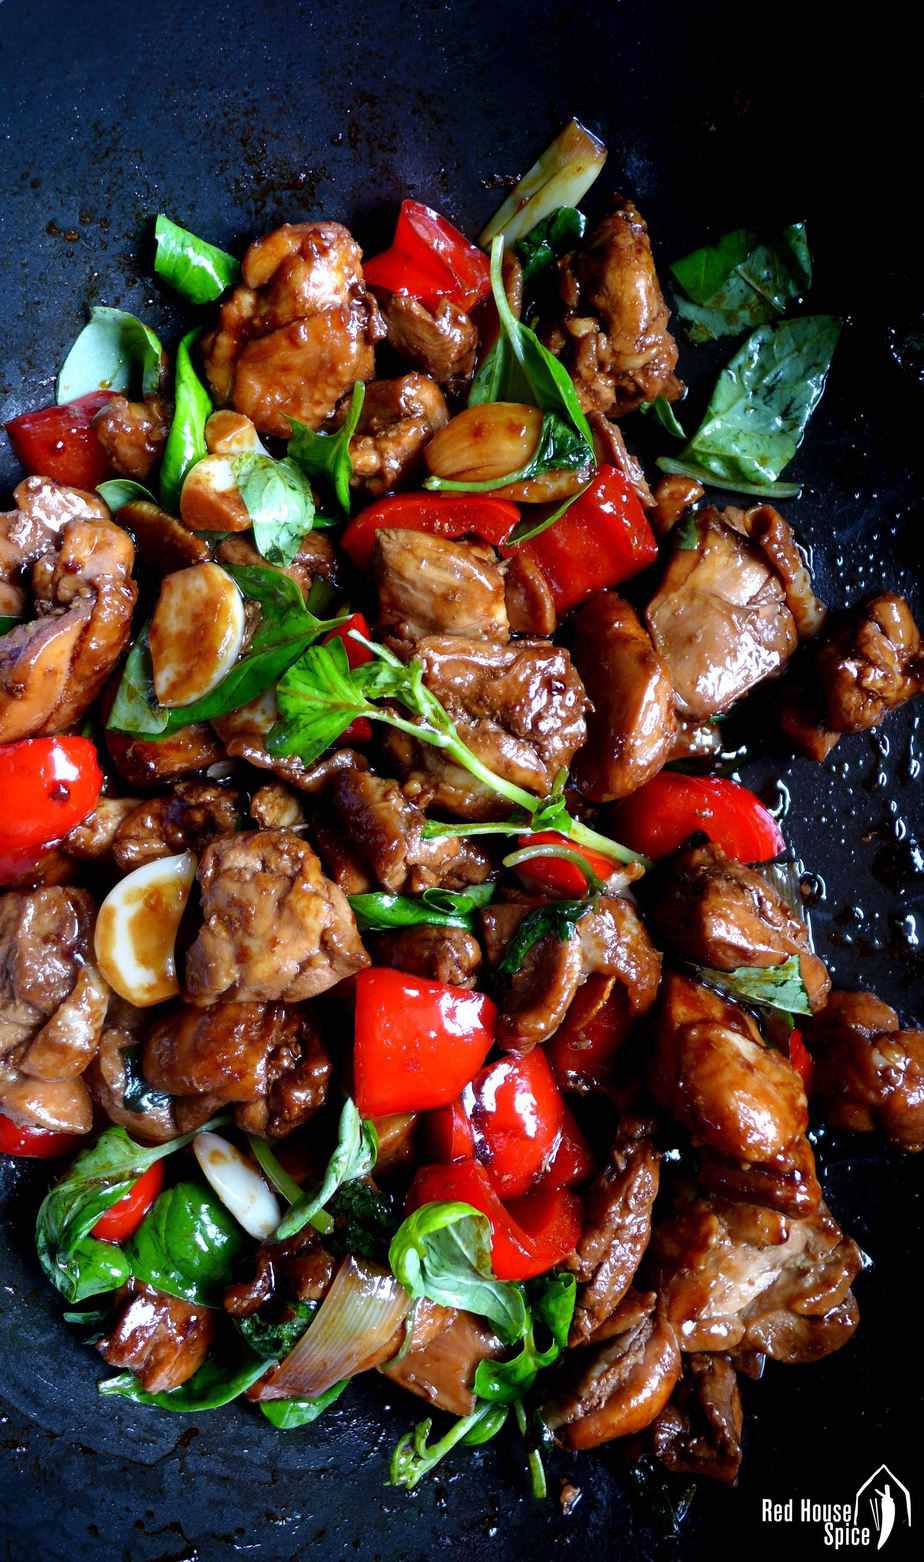 Stir-fried chicken with bell pepper & basil leaves